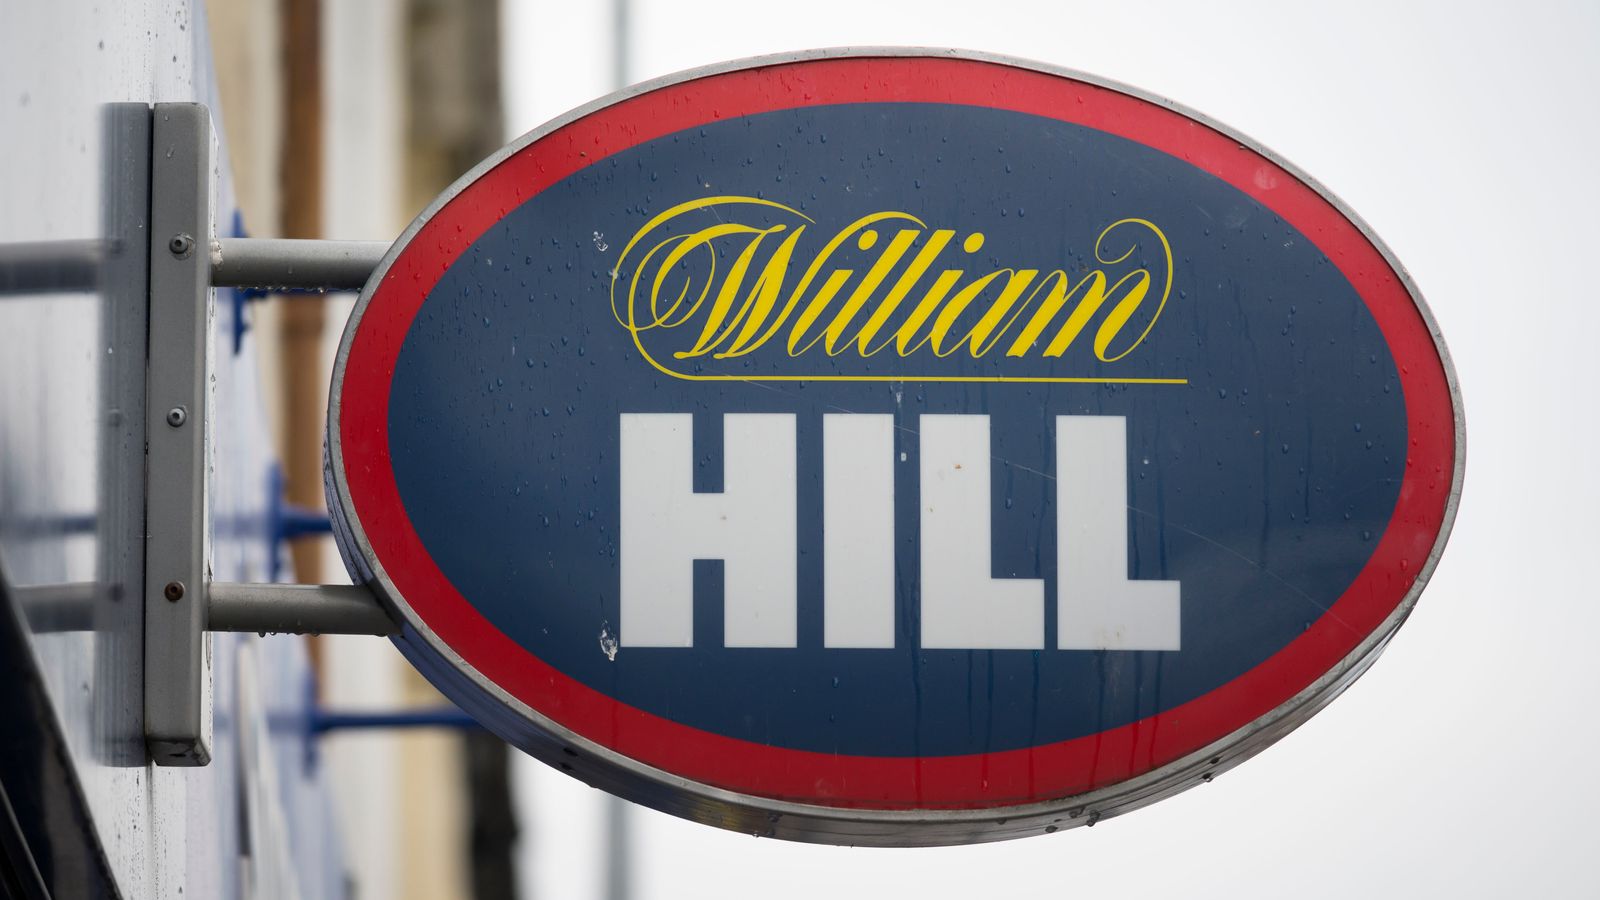 William Hill fined £19.2m by UK gambling regulator for 'widespread' failures